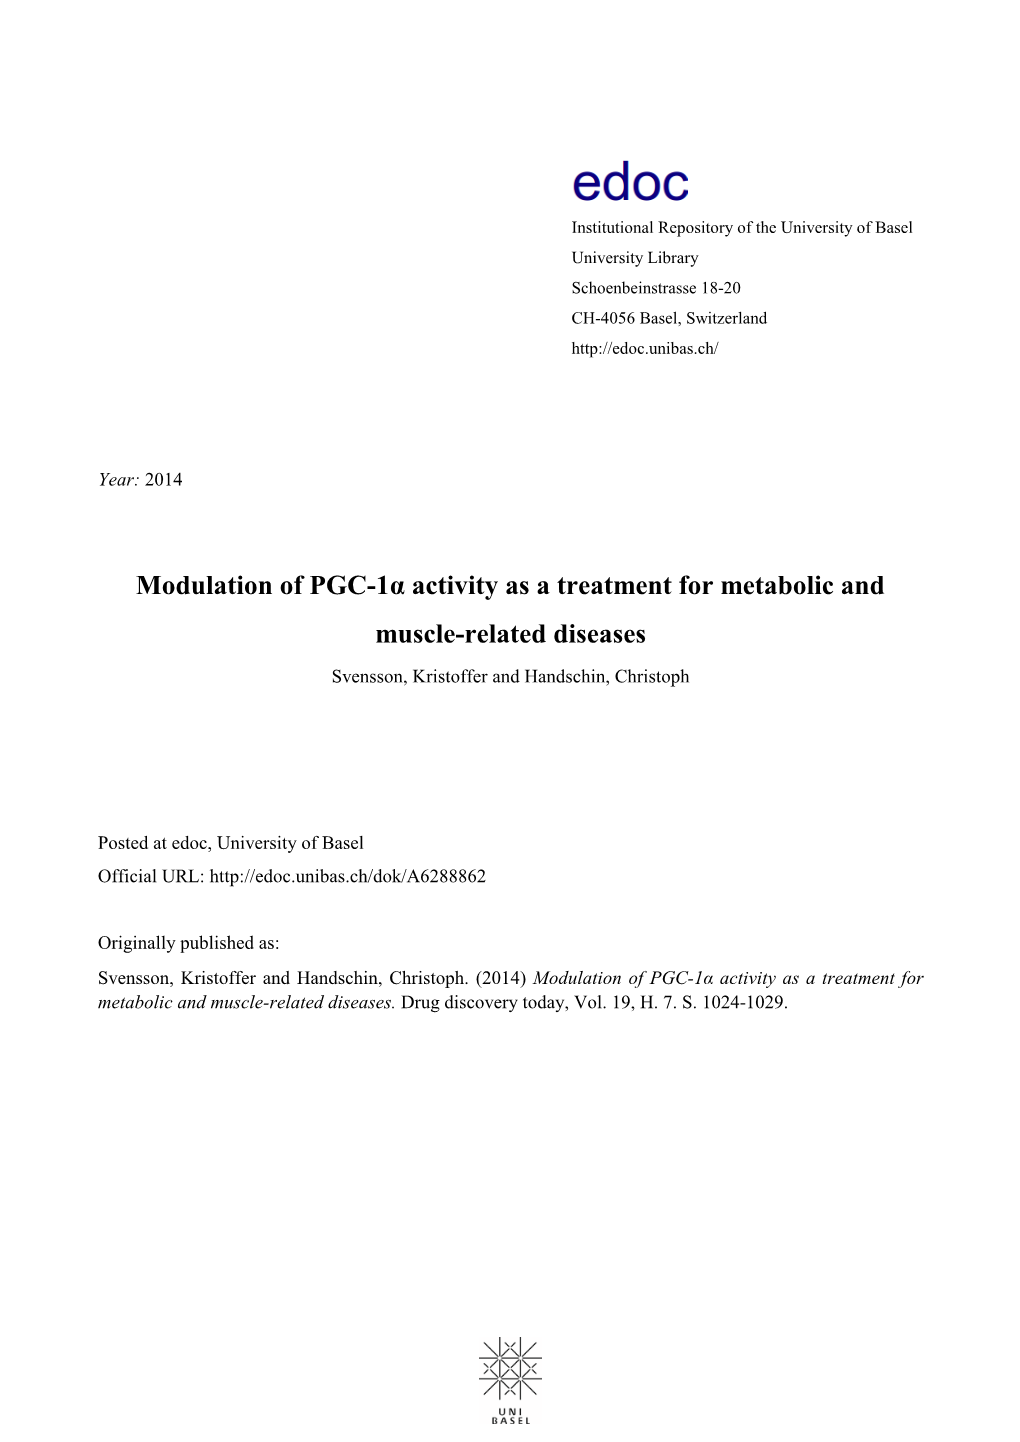 Modulation of PGC-1Α Activity As a Treatment for Metabolic and Muscle-Related Diseases Svensson, Kristoffer and Handschin, Christoph